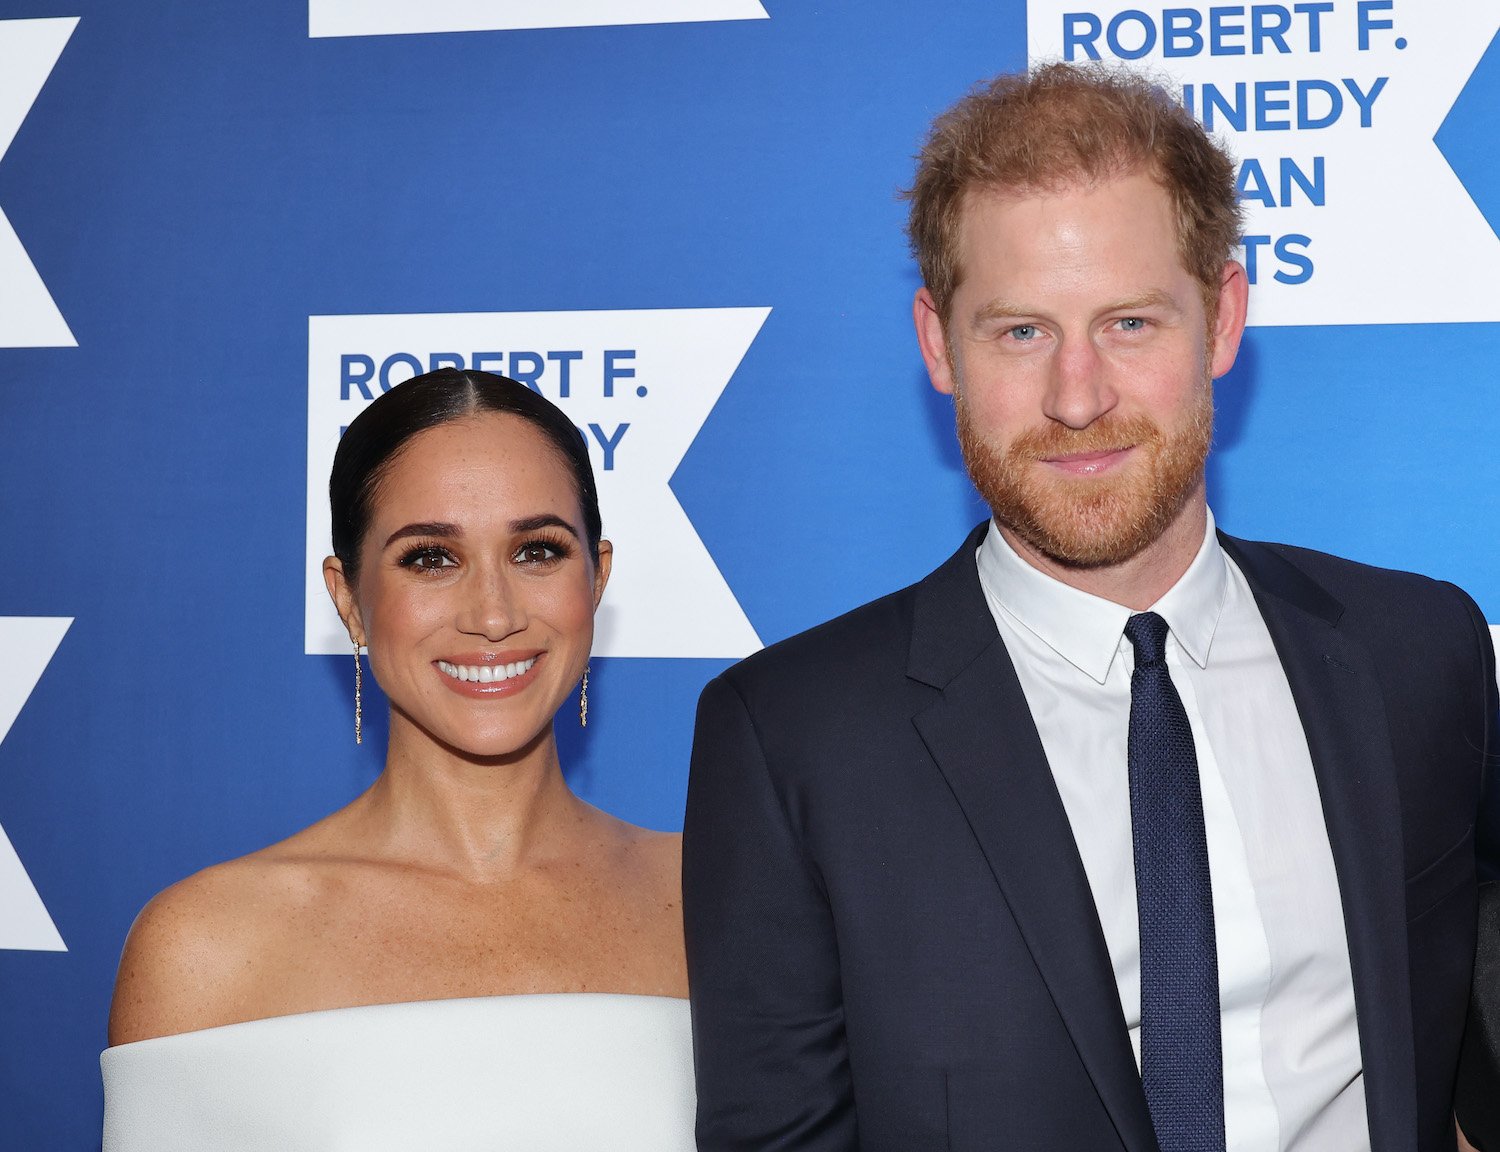 Prince Harry and Meghan Markle body language at Ripple of Hope Awards conveyed confidence and excitement